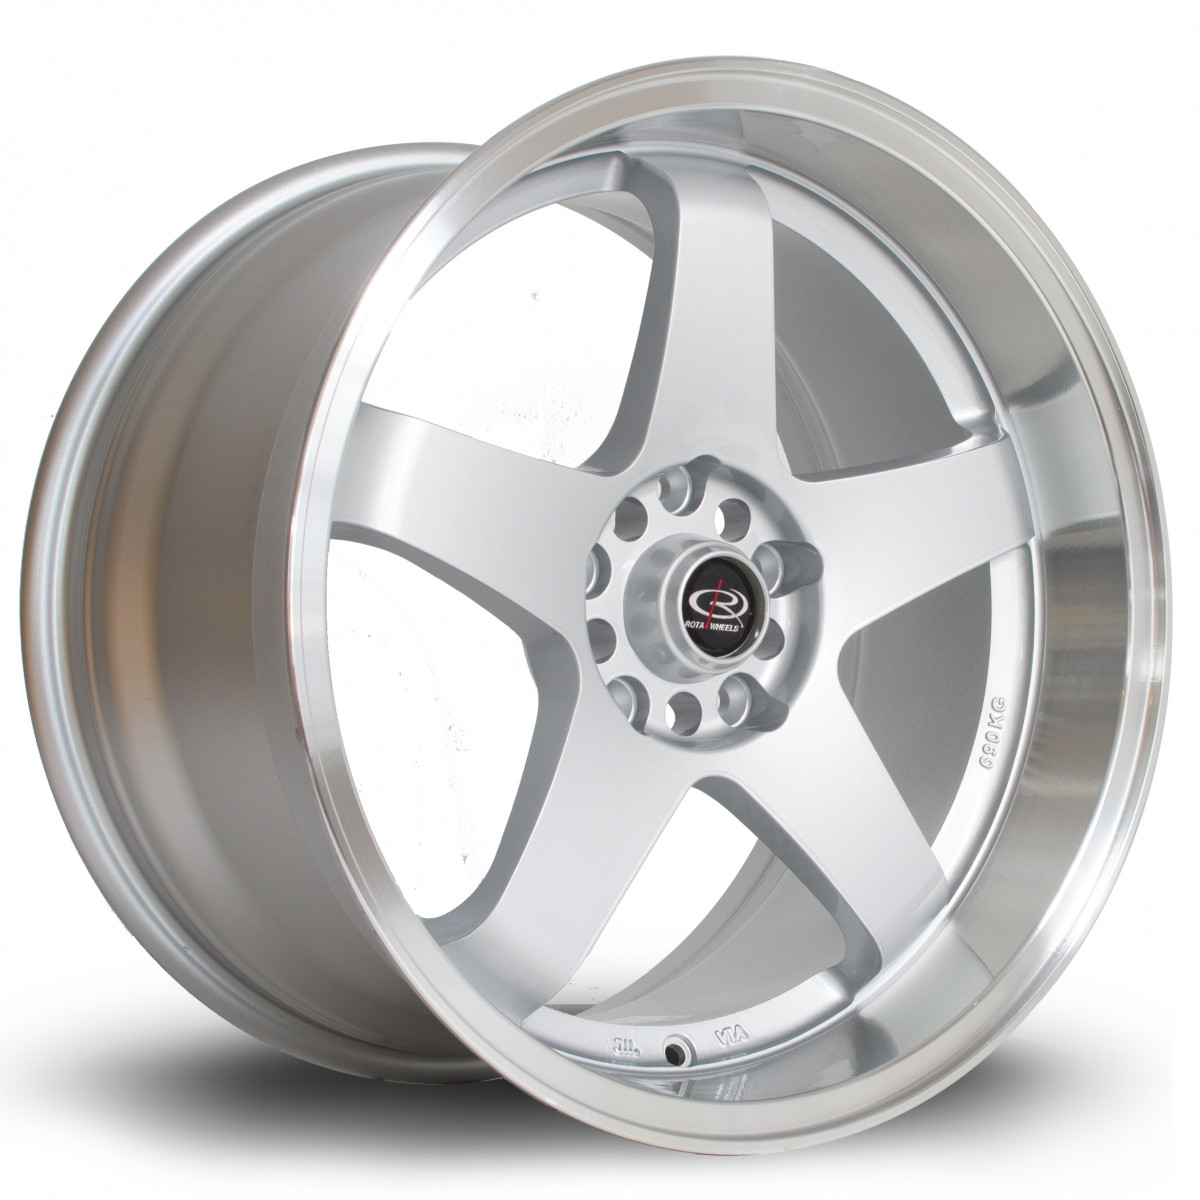 GTR-D 18x9.5 5x114 ET12 Silver with Polished Lip